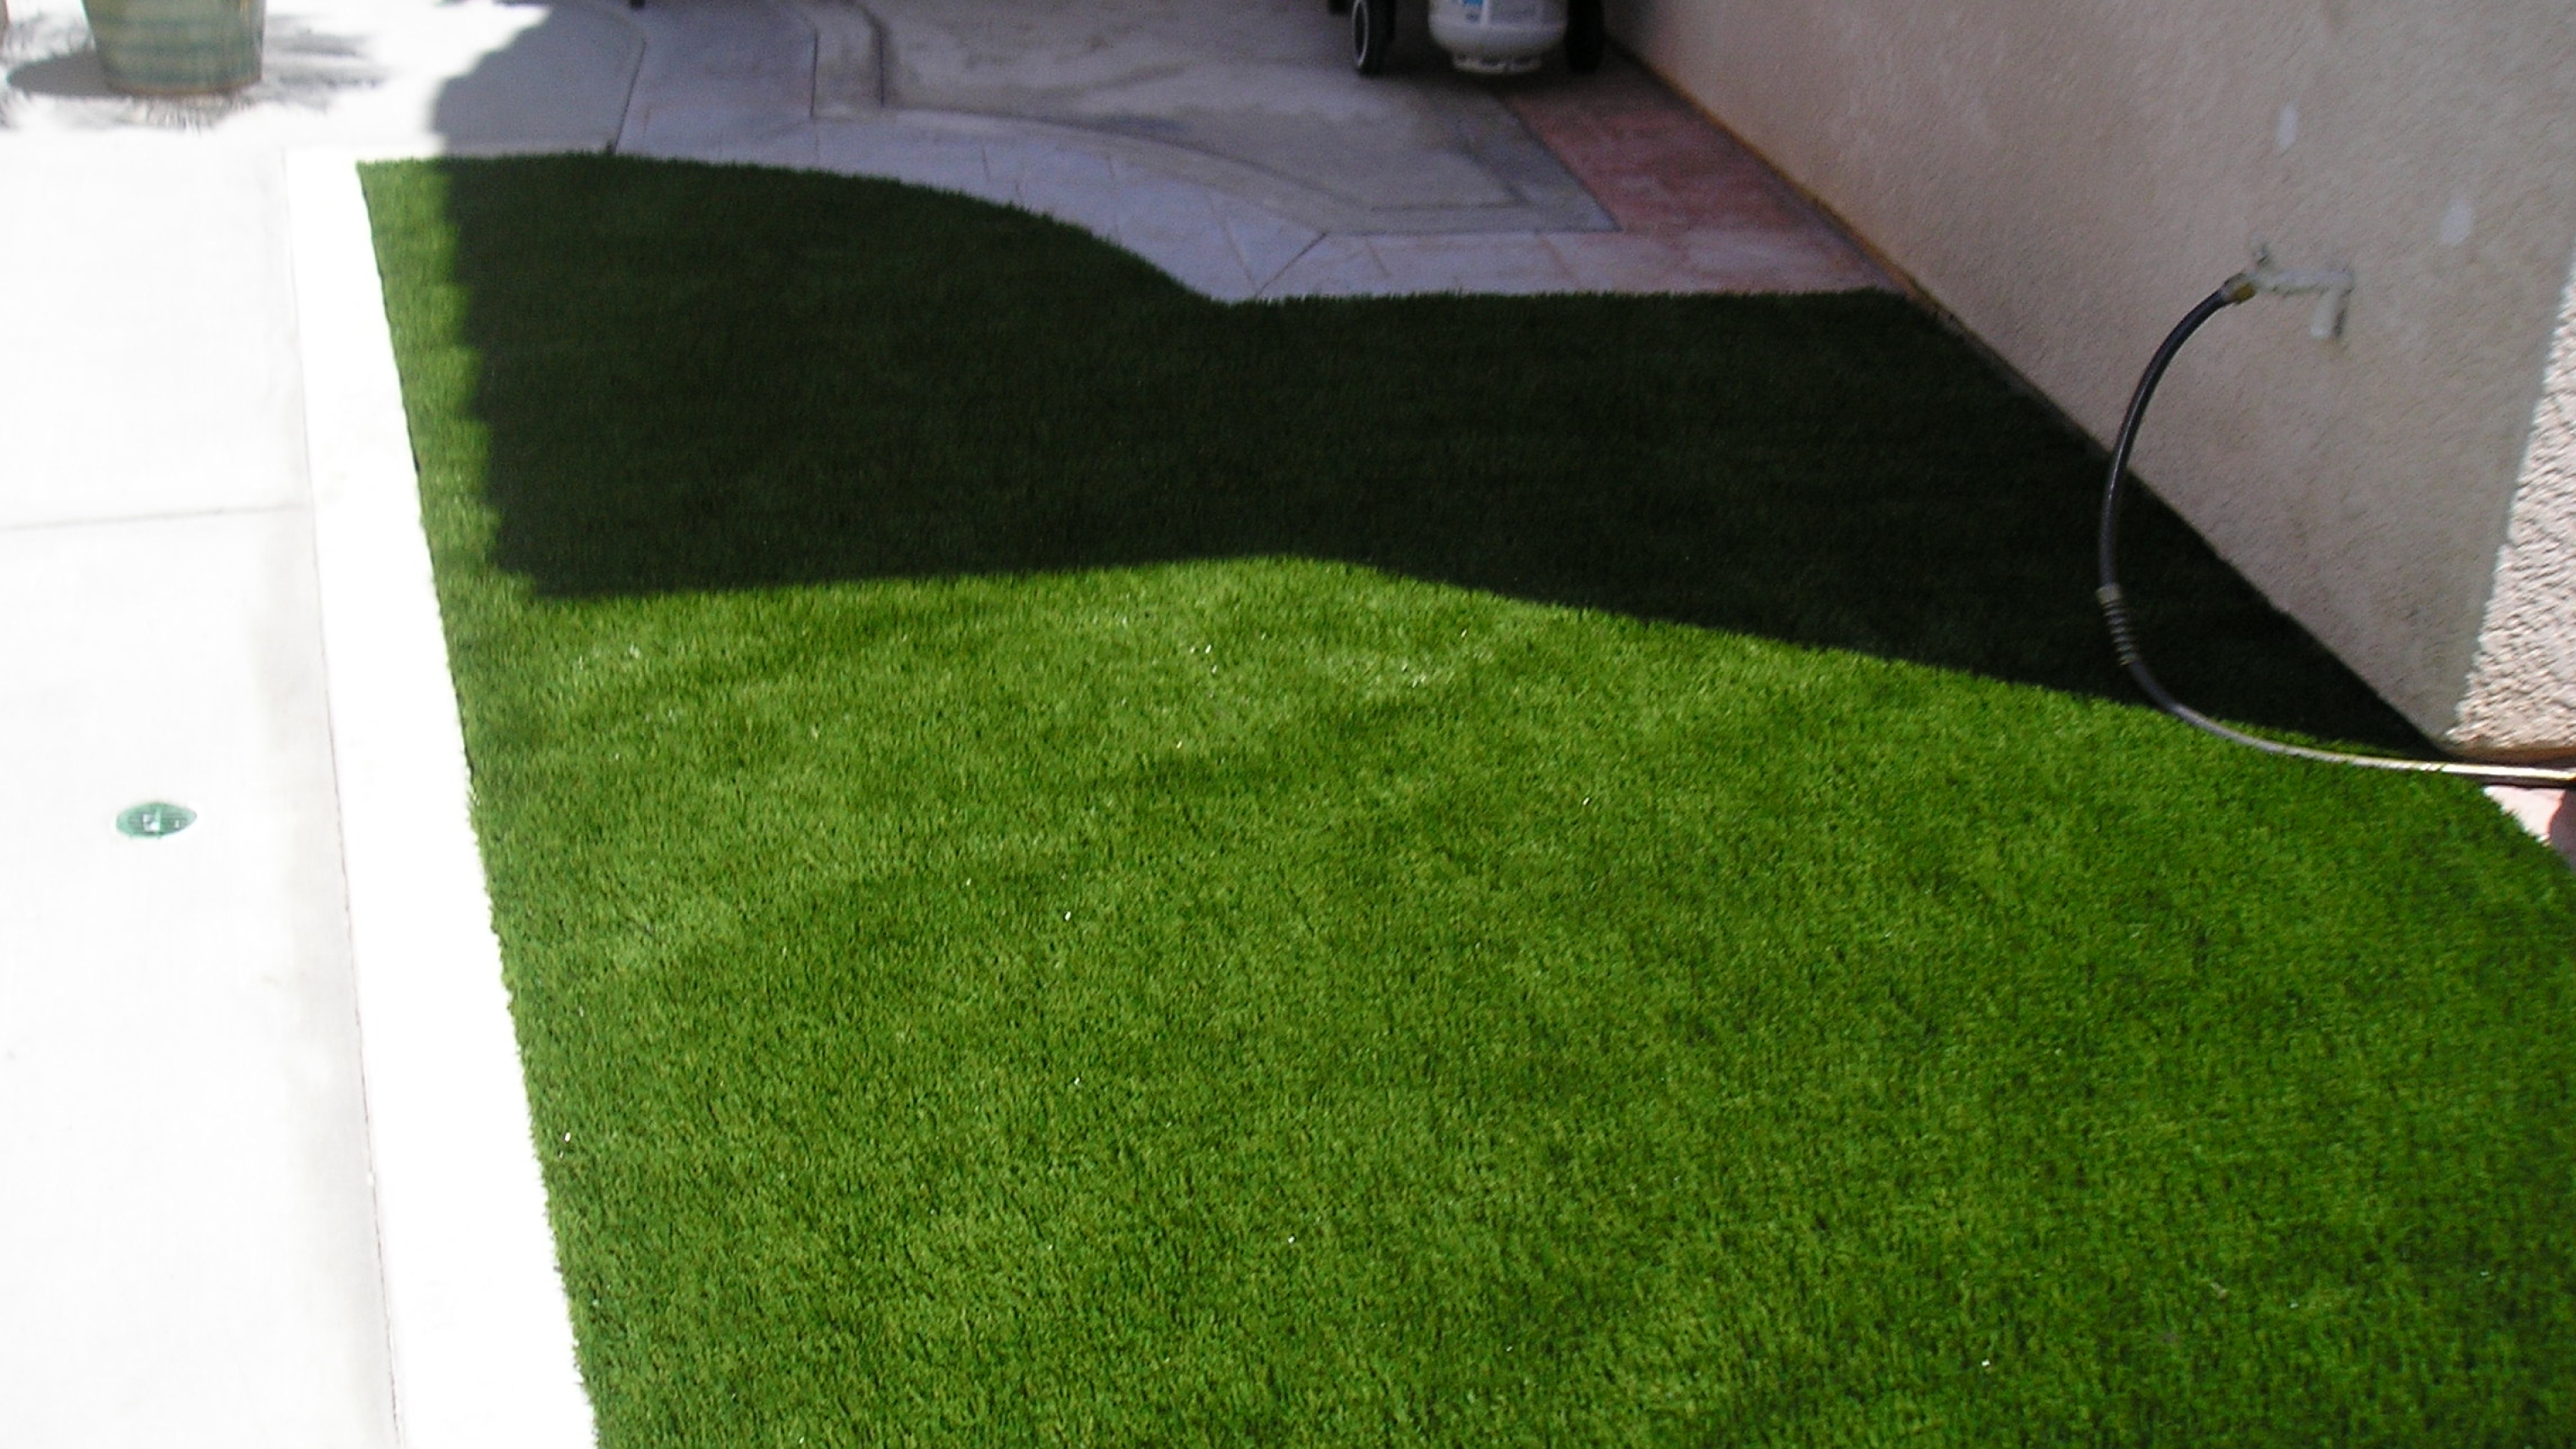 Super Natural 80 artificial turf,synthetic turf,artificial turf installation,how to install artificial turf,used artificial turf